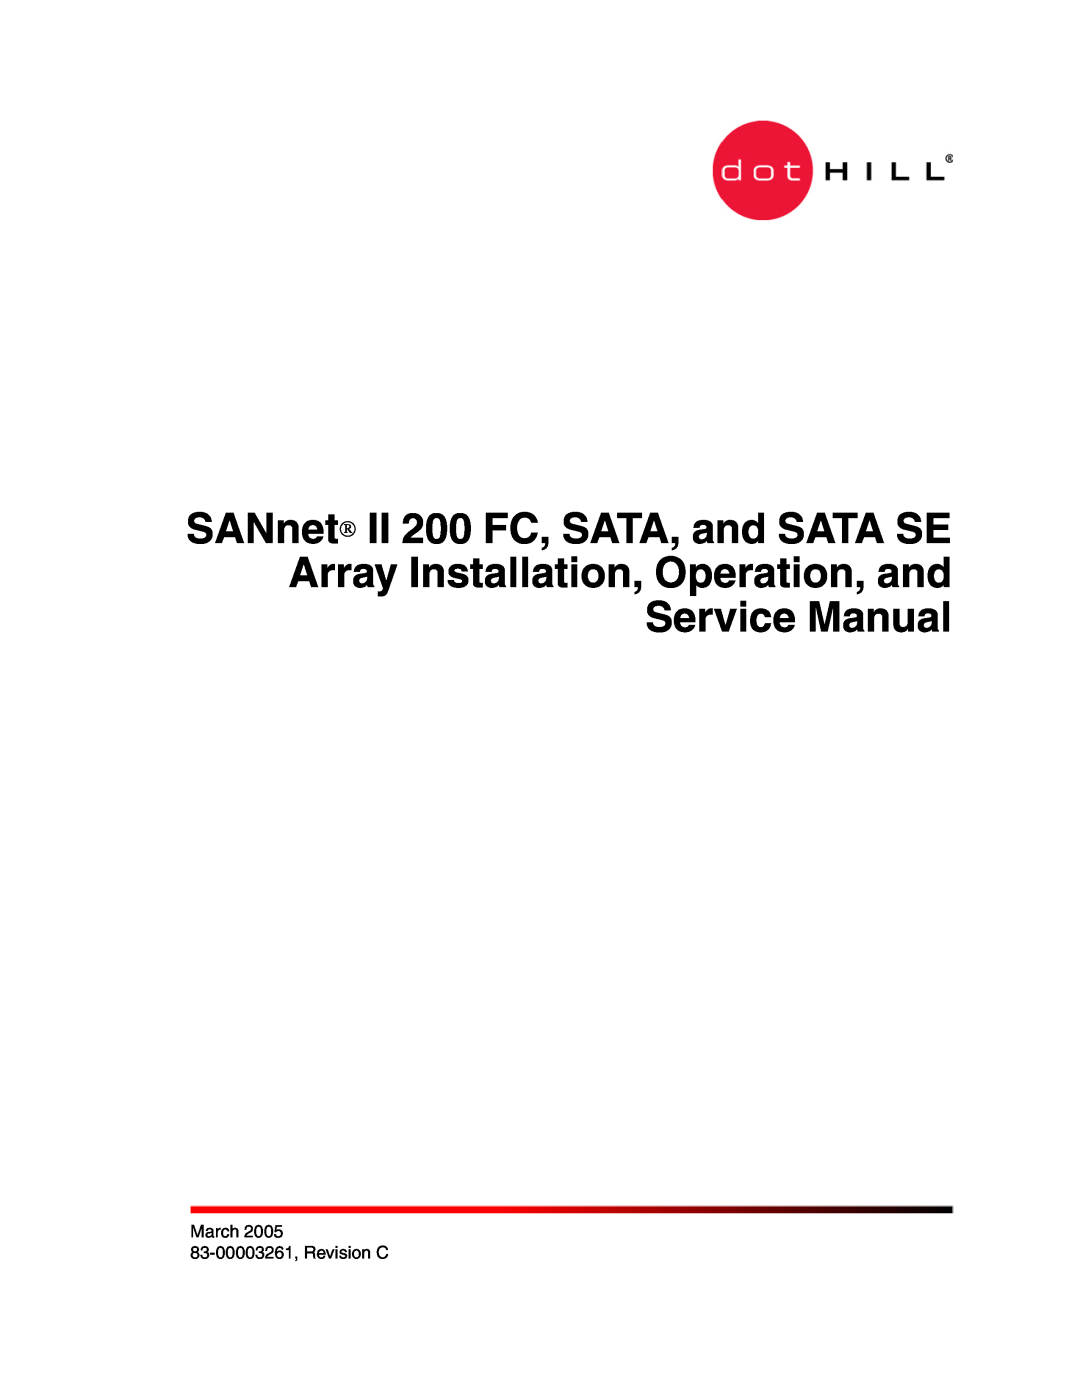 Dot Hill Systems service manual SANnet II 200 FC, SATA, and SATA SE, Array Installation, Operation, and Service Manual 